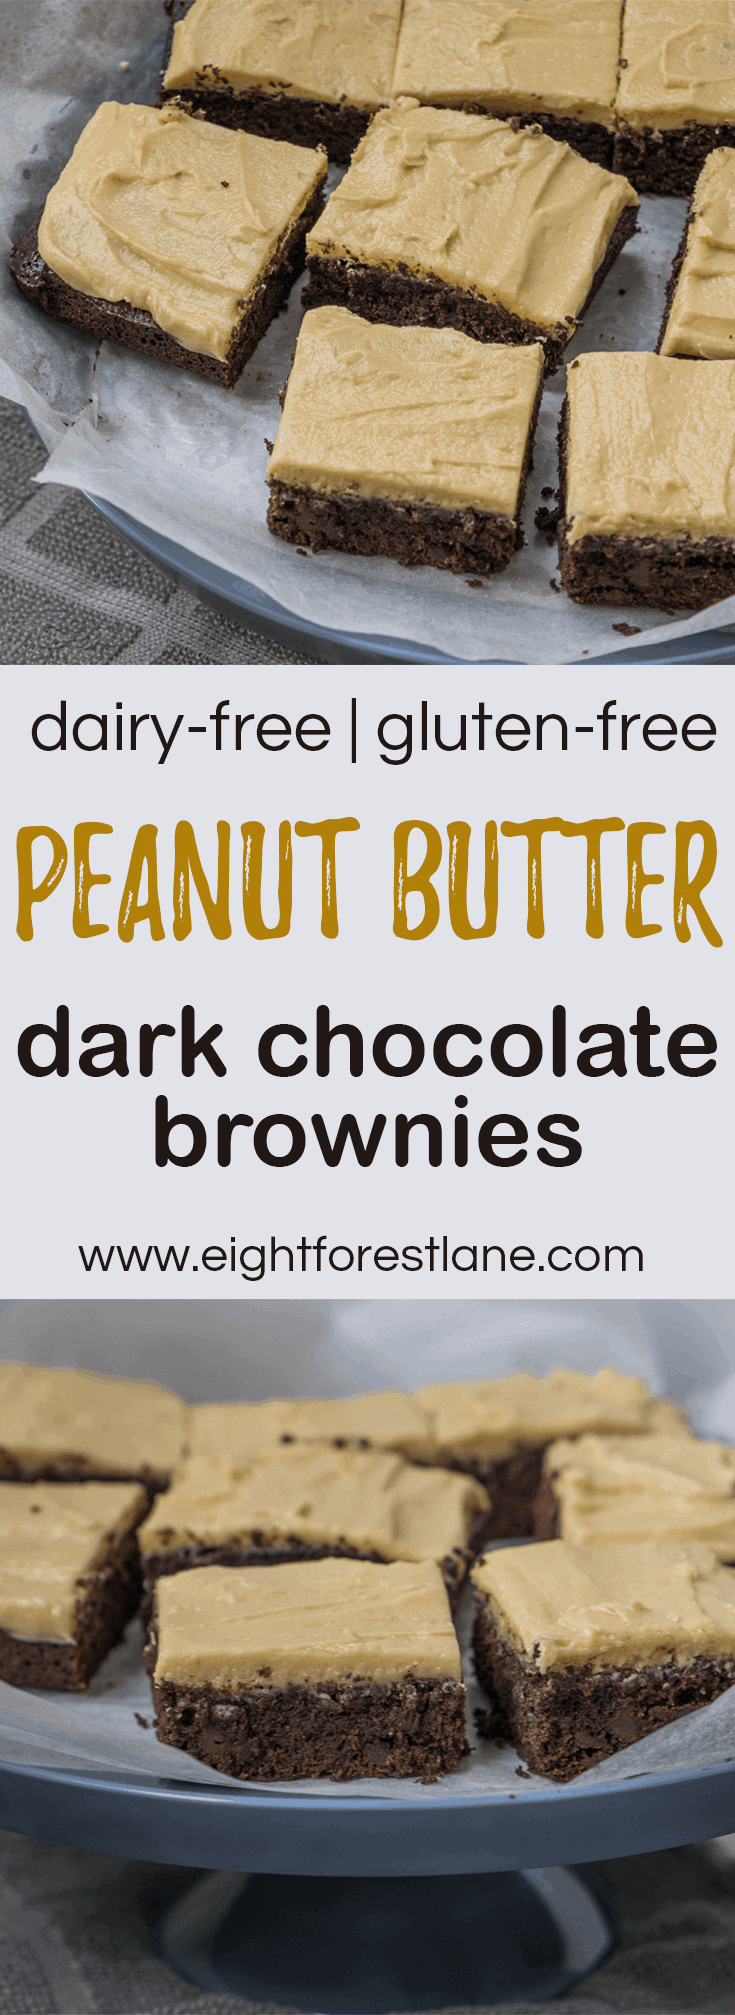 Deliciously decadent & rich dark chocolate brownies slathered with a generous amount of creamy peanut butter frosting. Completely dairy and gluten free!